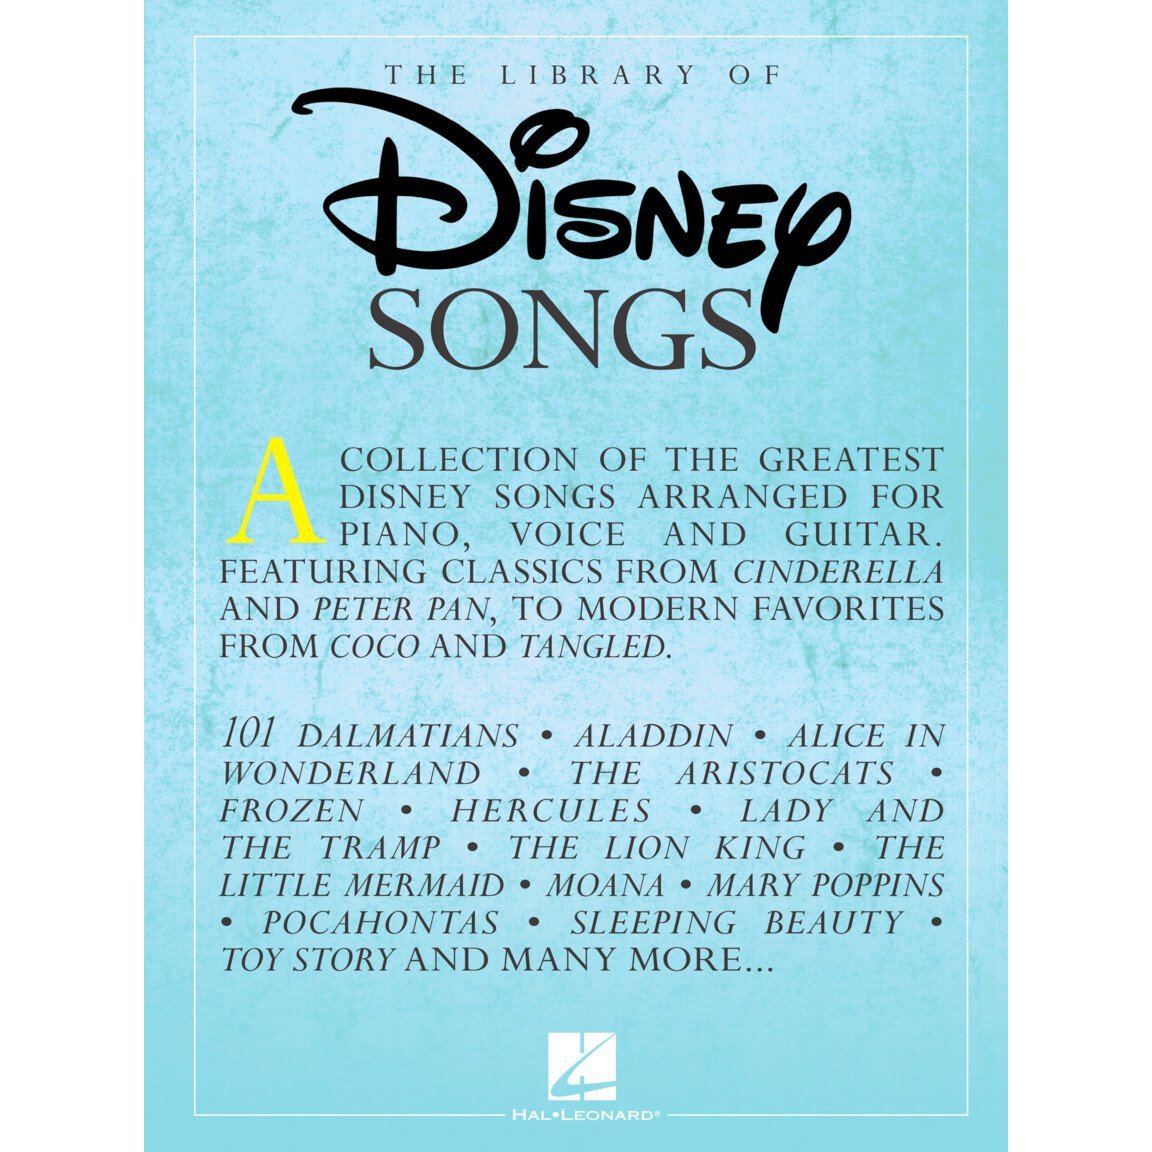 Hal Leonard HL14856 Library of Disney Songs Piano/Vocal/Guitar-Music World Academy